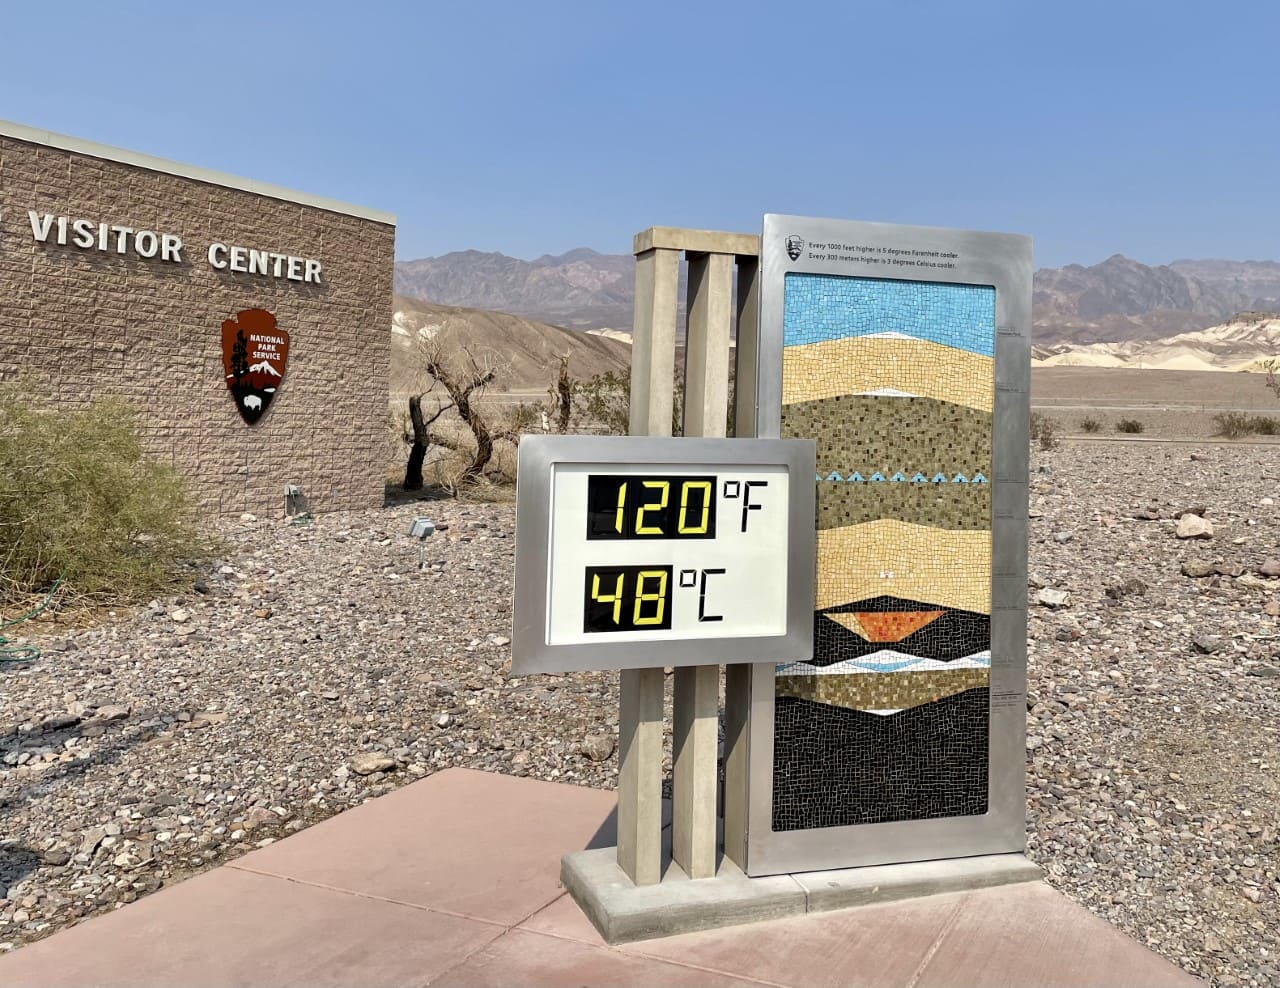 How Hot Does Furnace Creek Get? Temperature Insights